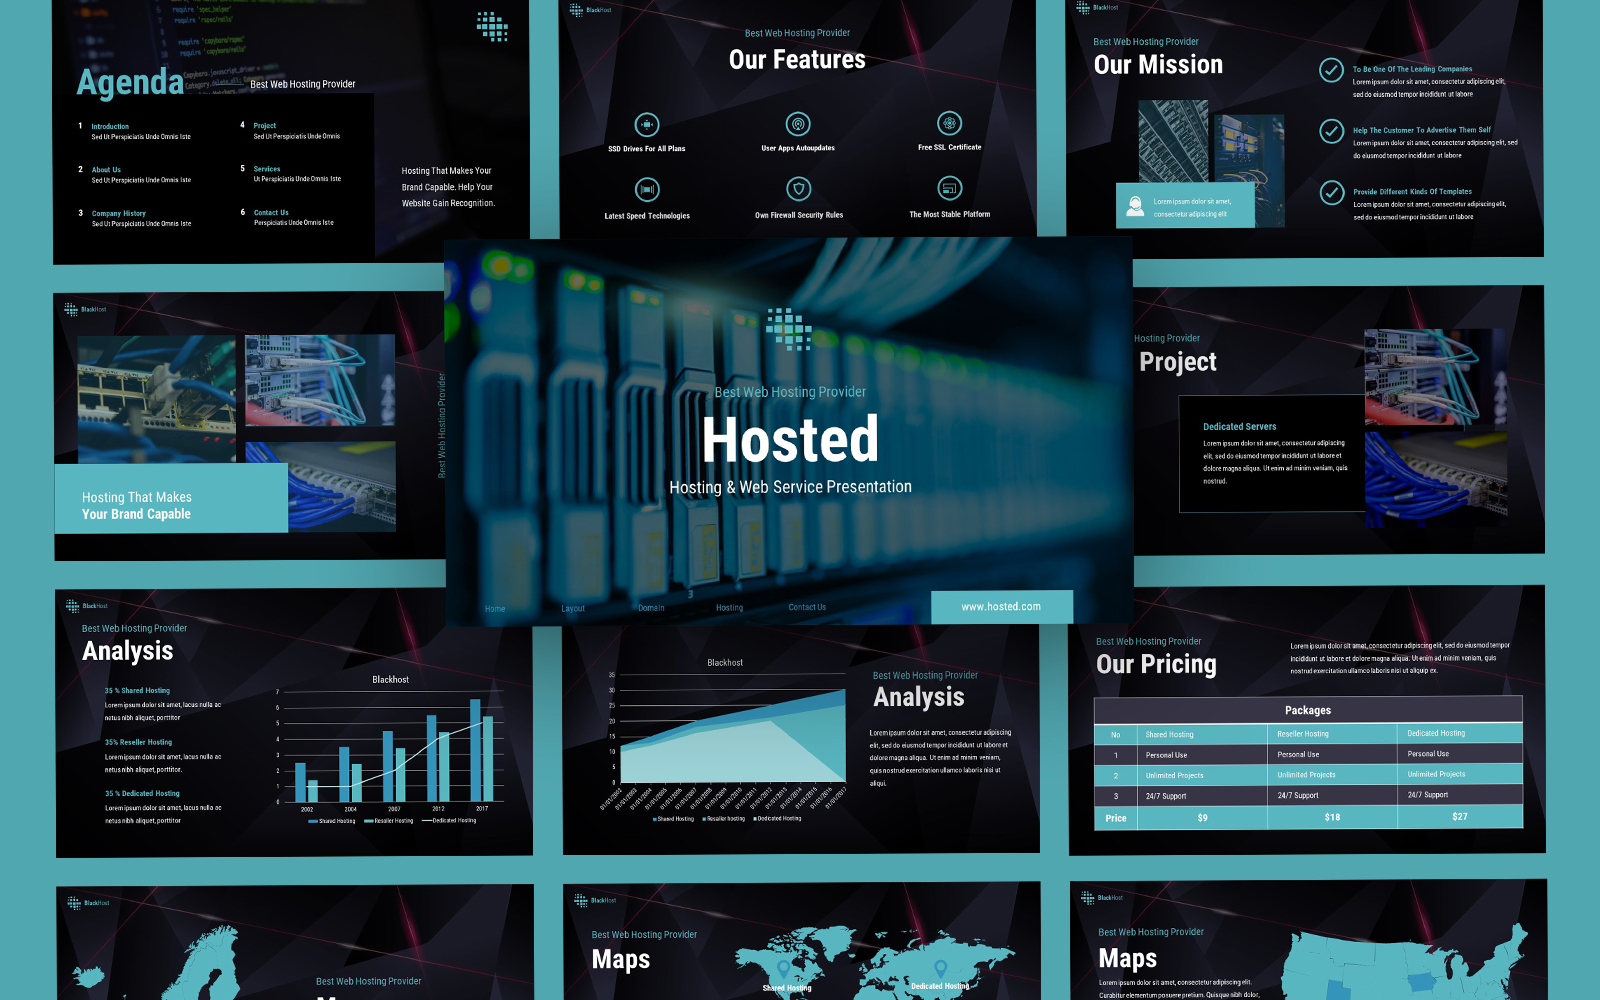 Hosted Hosting & Web Servies PowerPoint Template